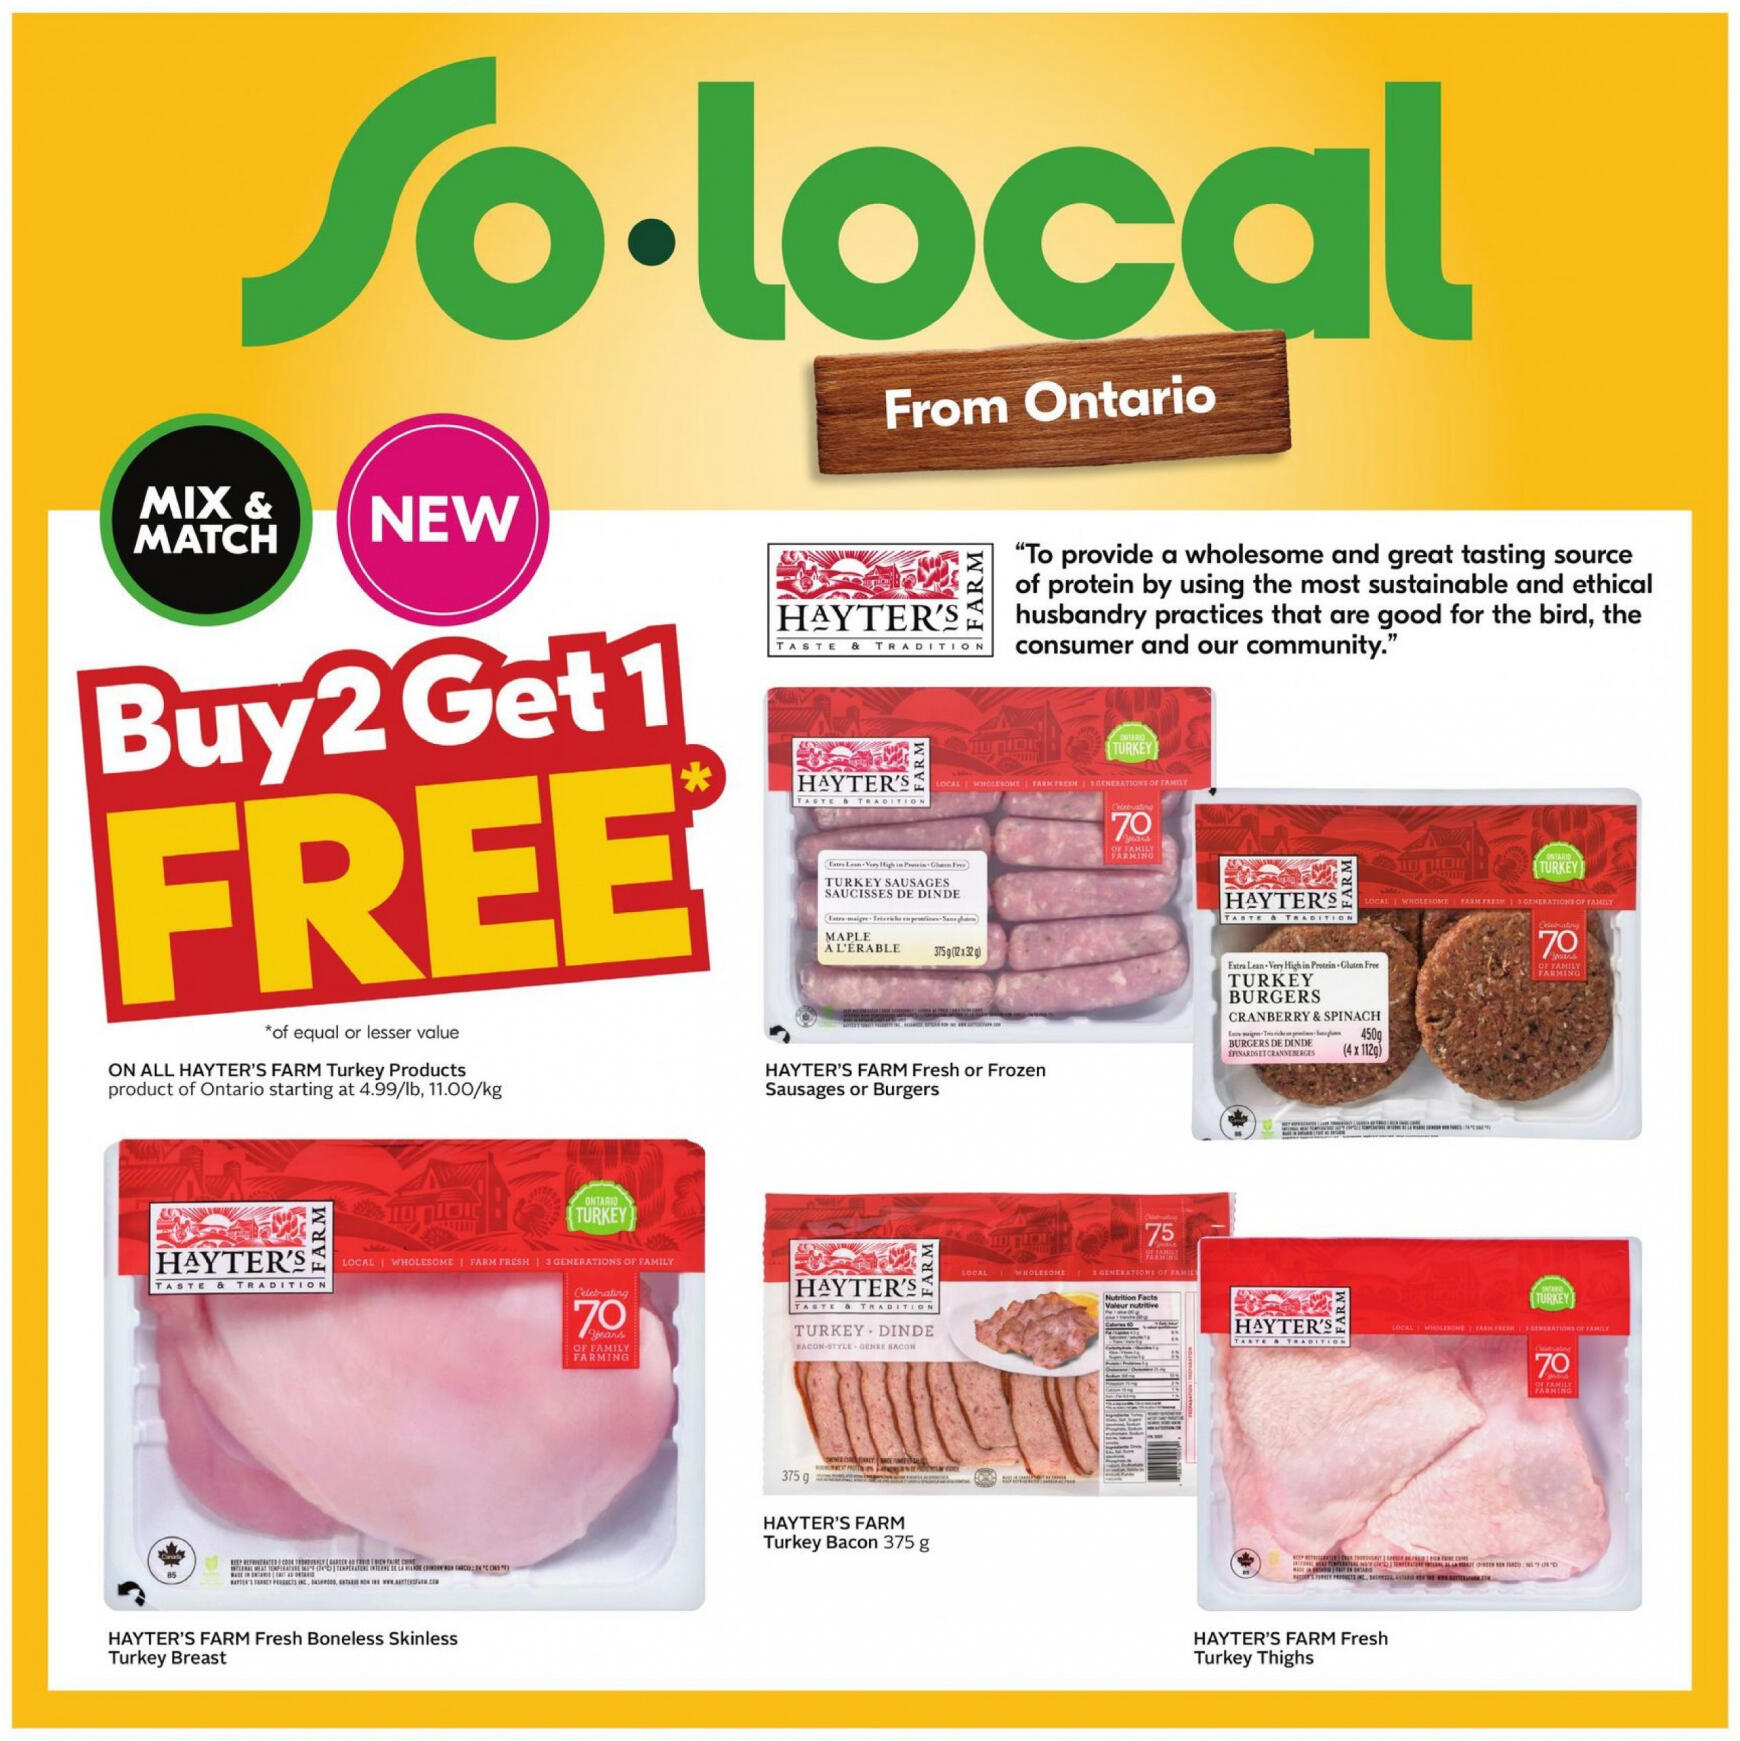 sobeys - Sobeys - Weekly Flyer - Ontario flyer current 23.05. - 29.05. - page: 8